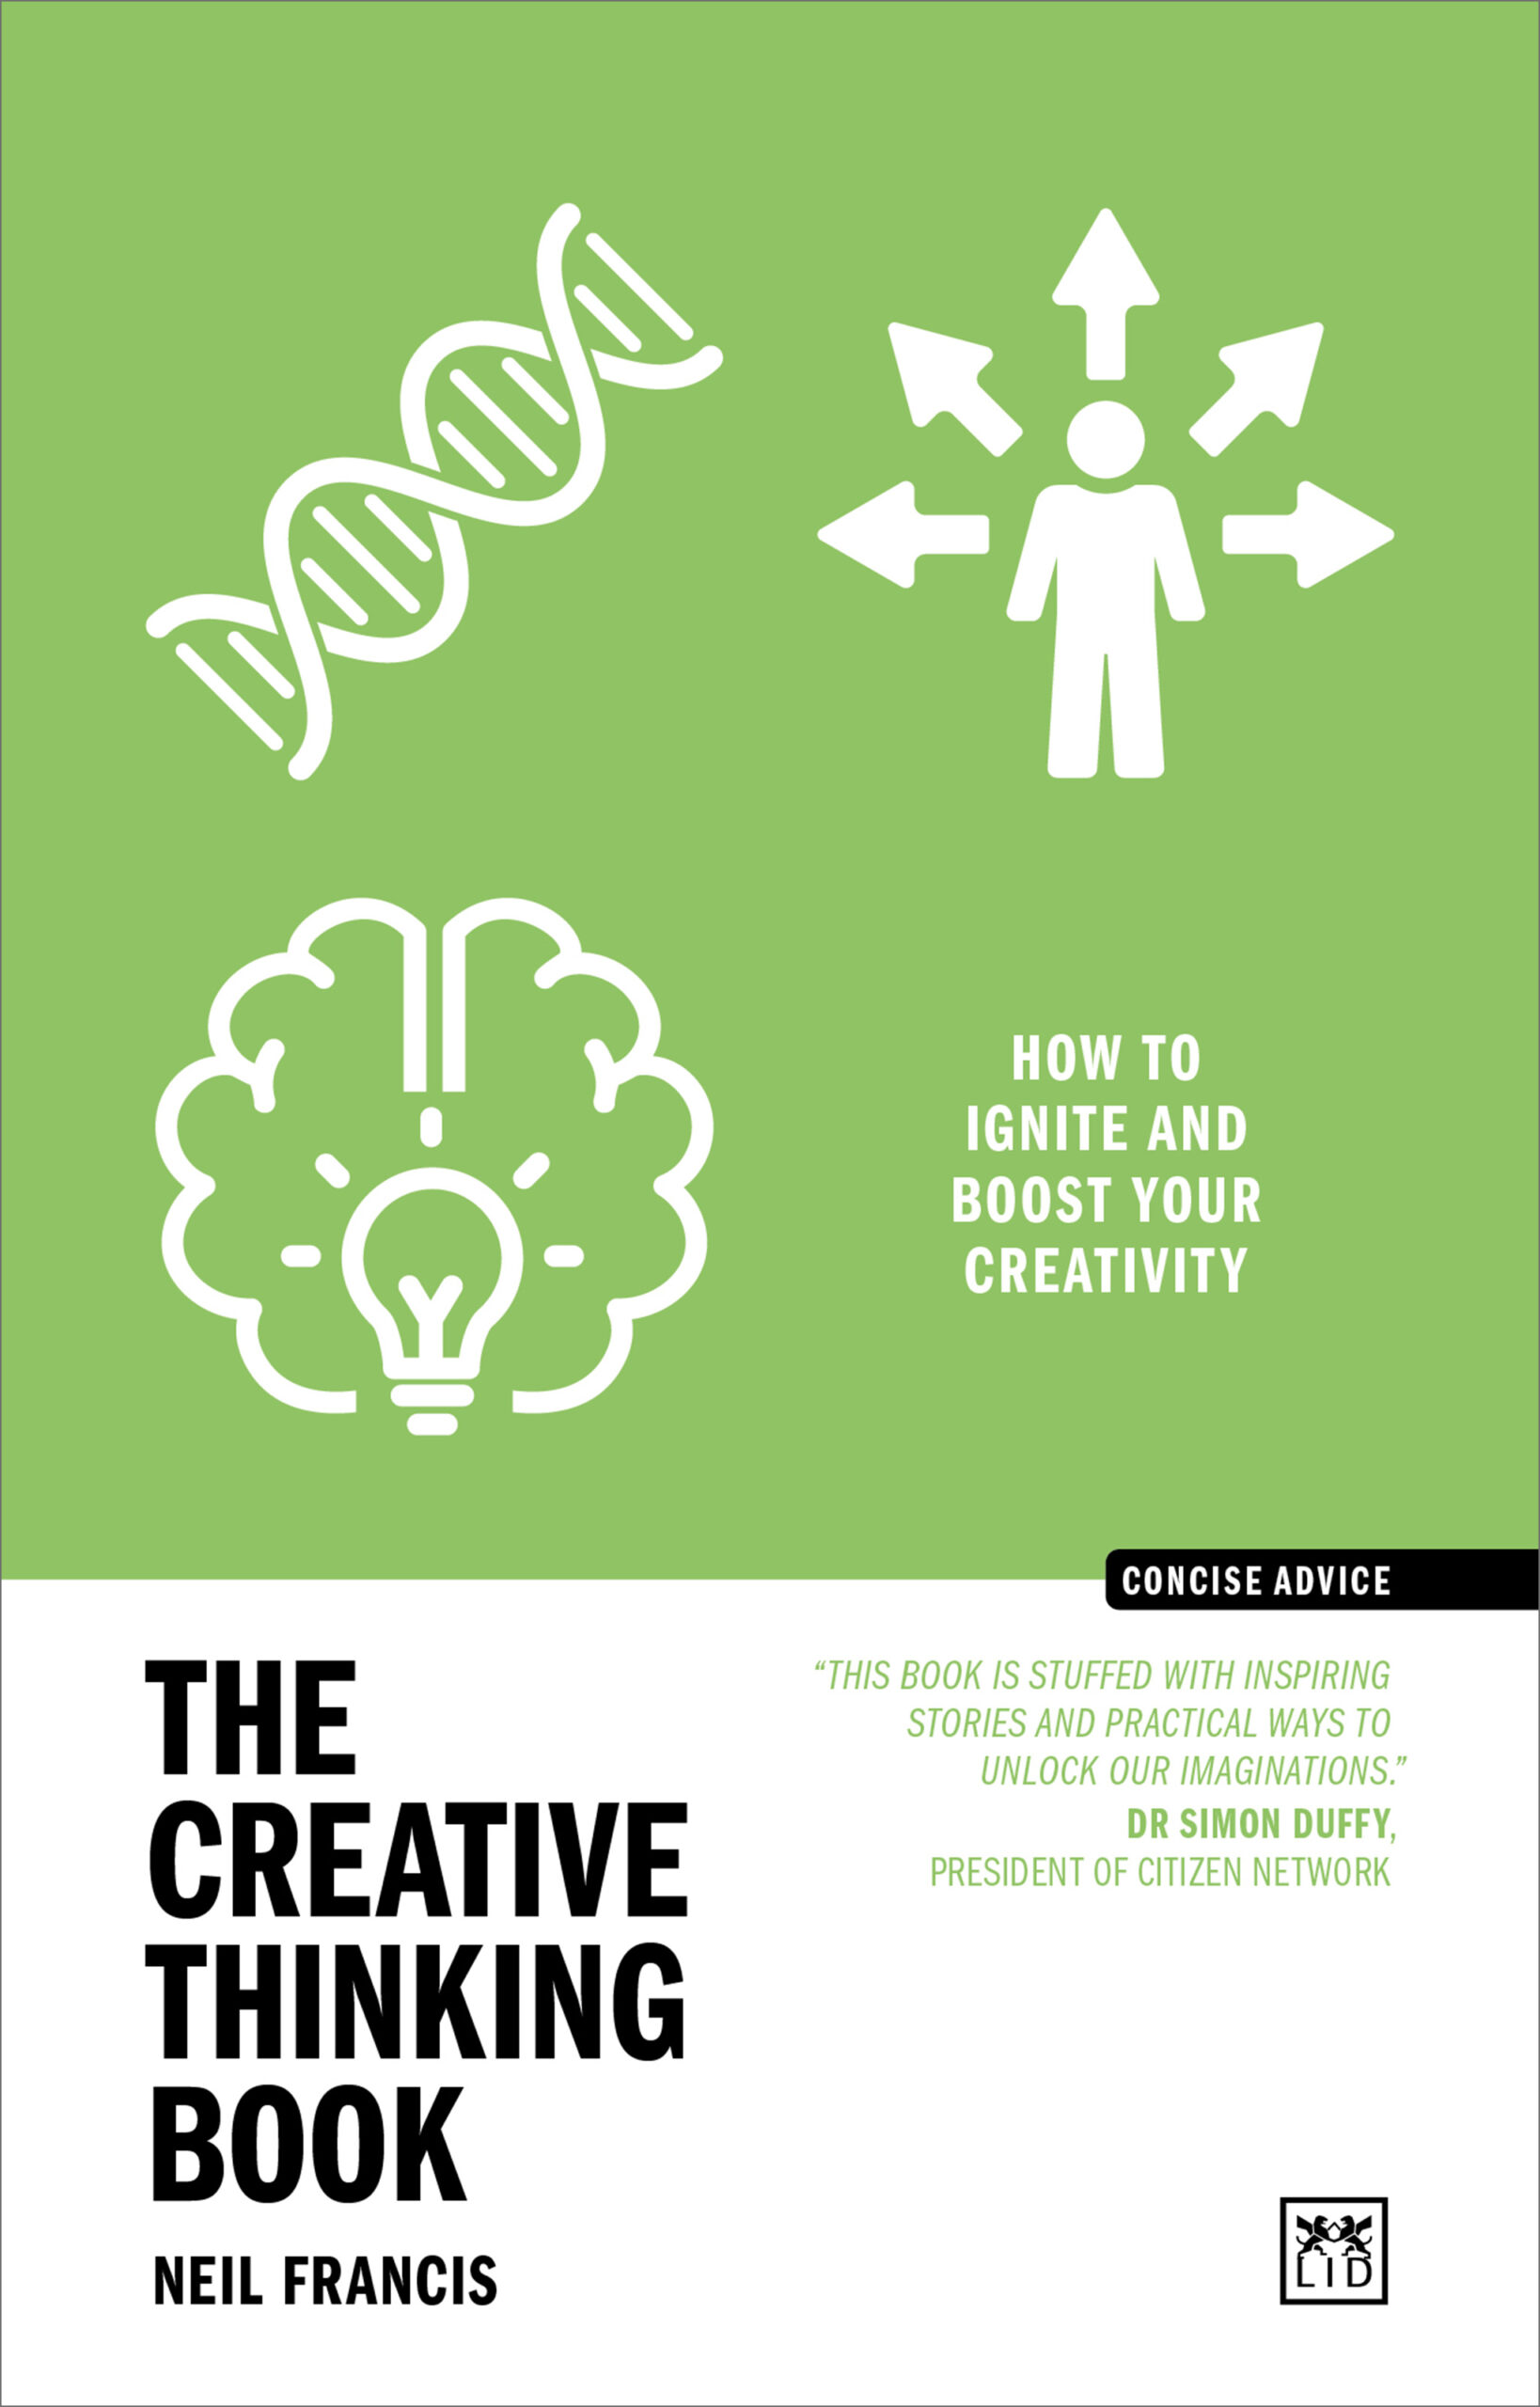 The Creative Thinking Book: How to Ignite and Boost Your Creativity by